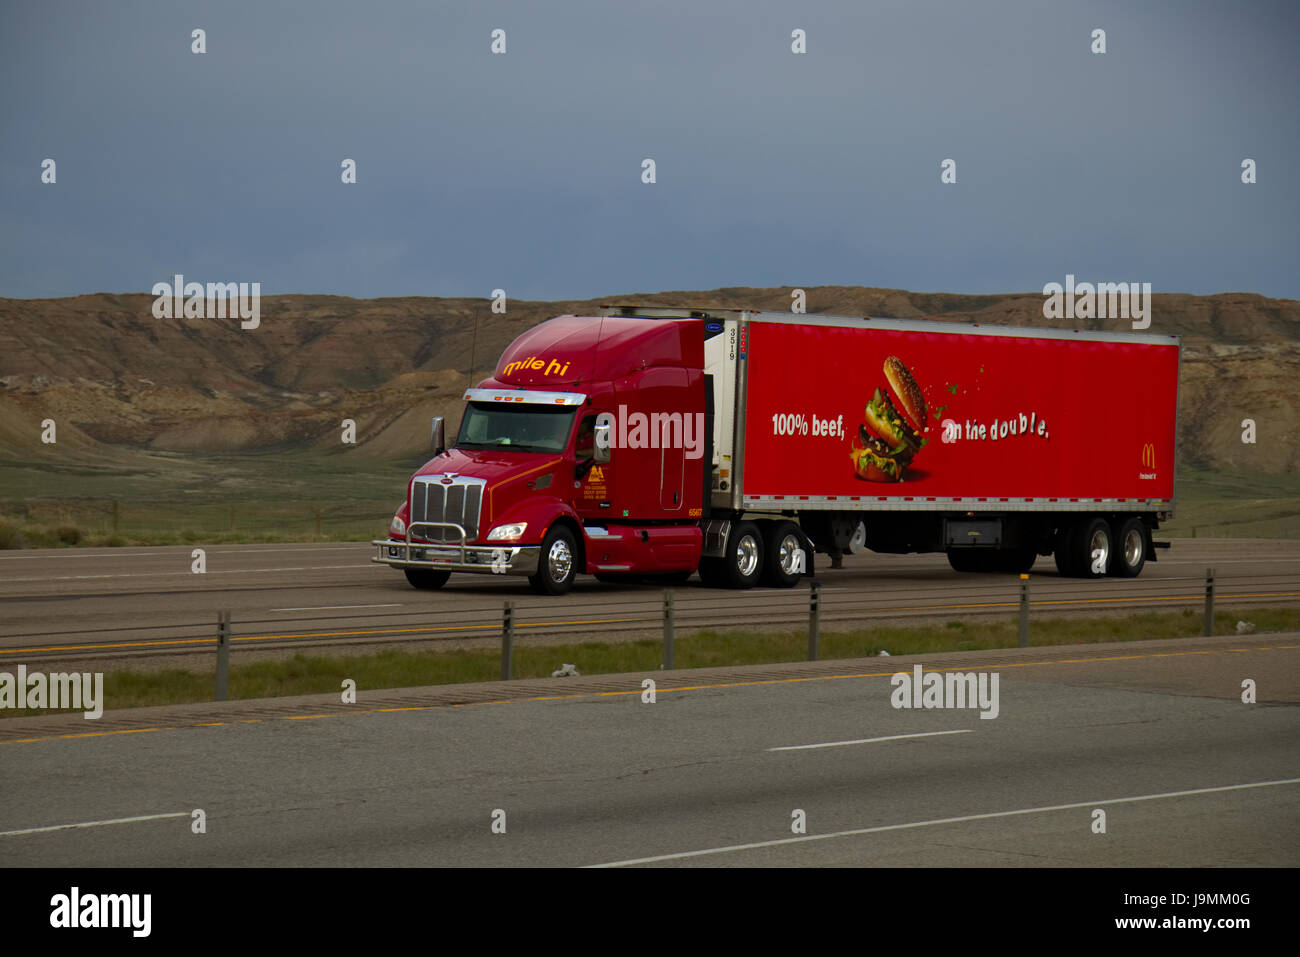 A Red 'Mile-Hi' Peterbilt Semi-Truck Pulls a Red McDonald's Food Chain Trailer along a rural US Interstate. Stock Photo